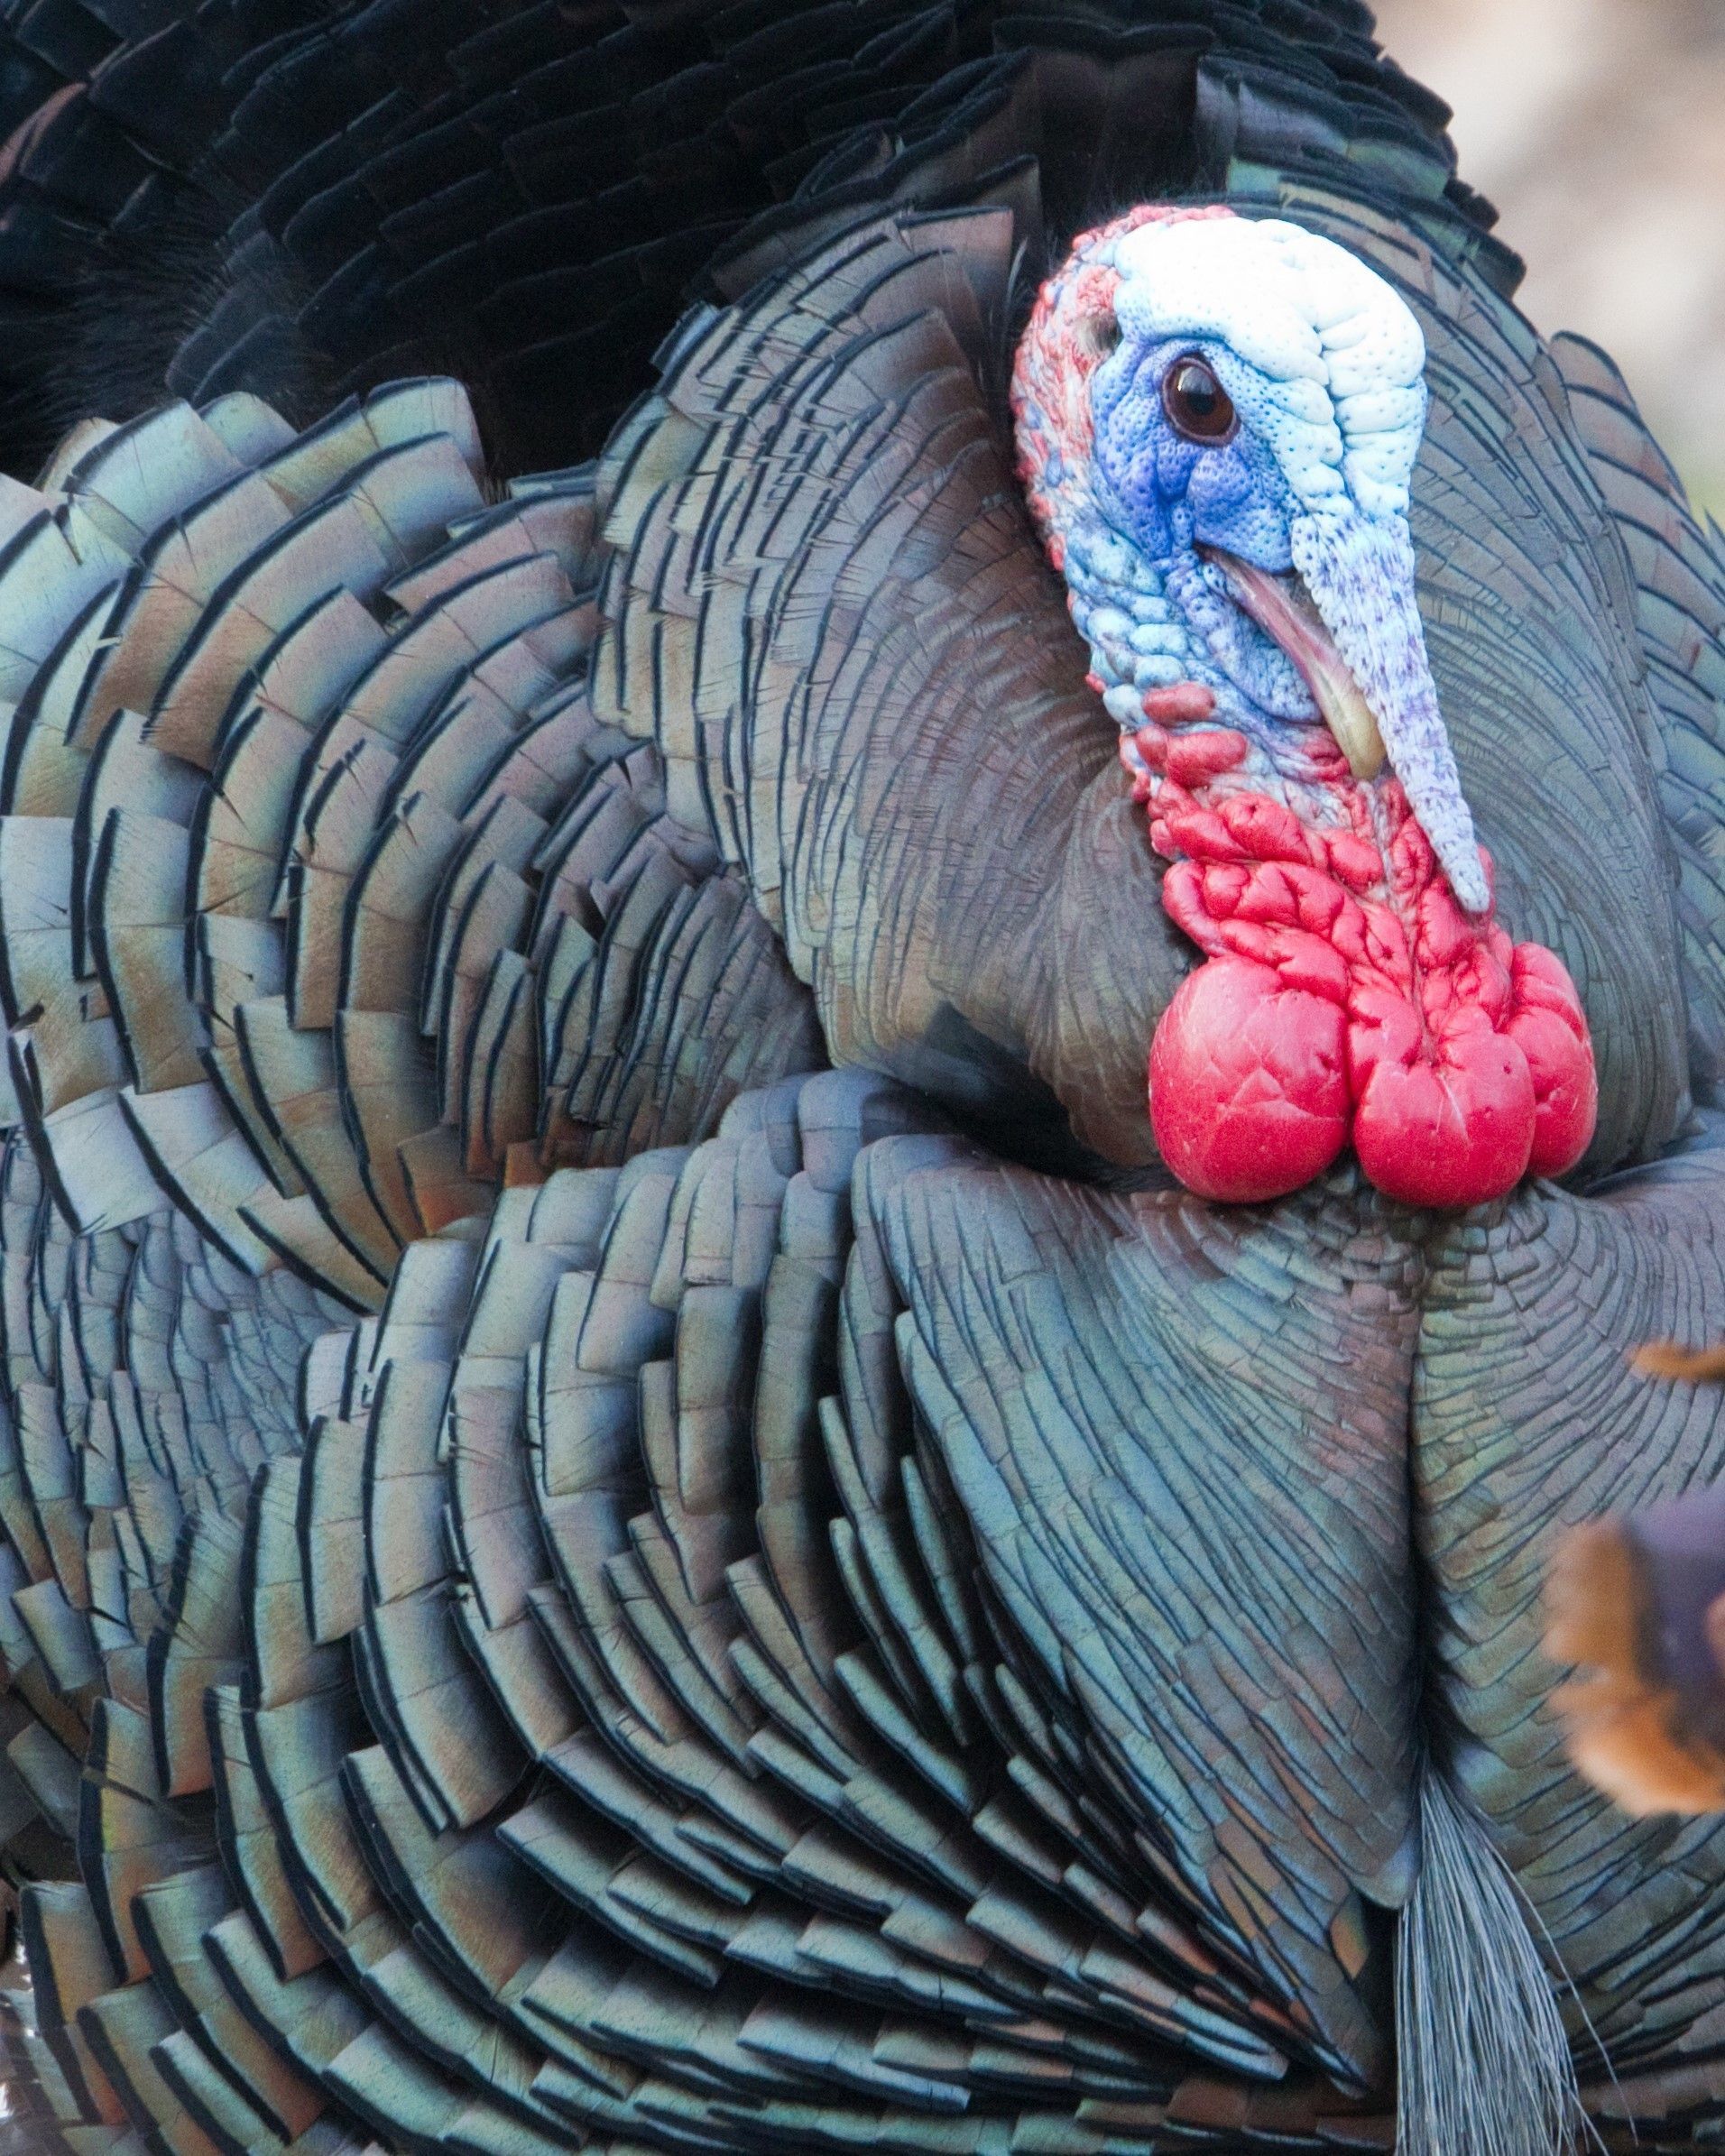 Youth Hunters Harvest 1,103 Wild Turkeys During Special Weekend